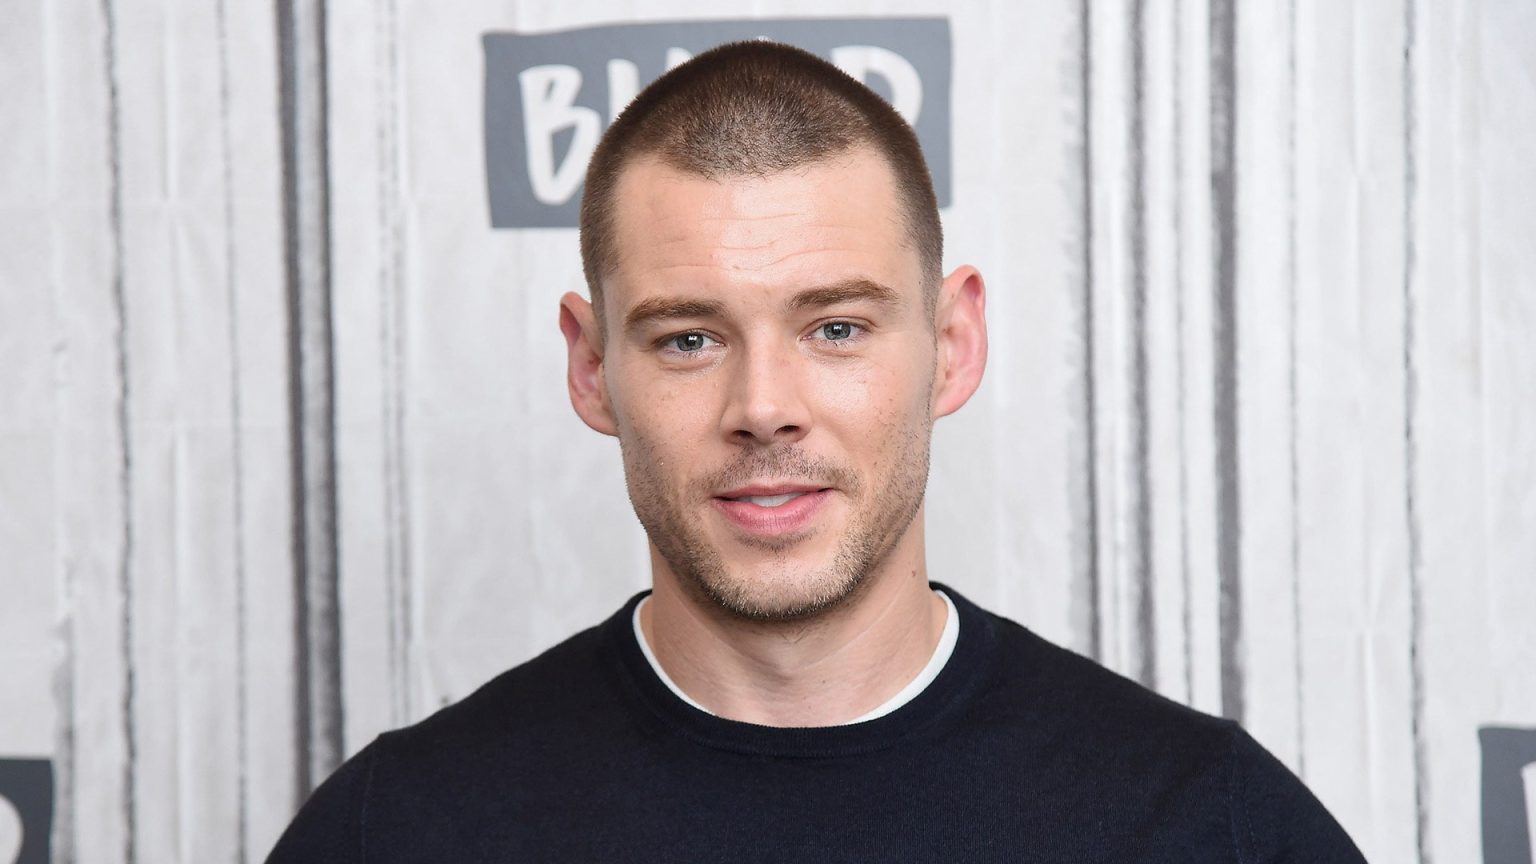 Brian J. Smith All Body Measurements Including Height, Weight, Shoe